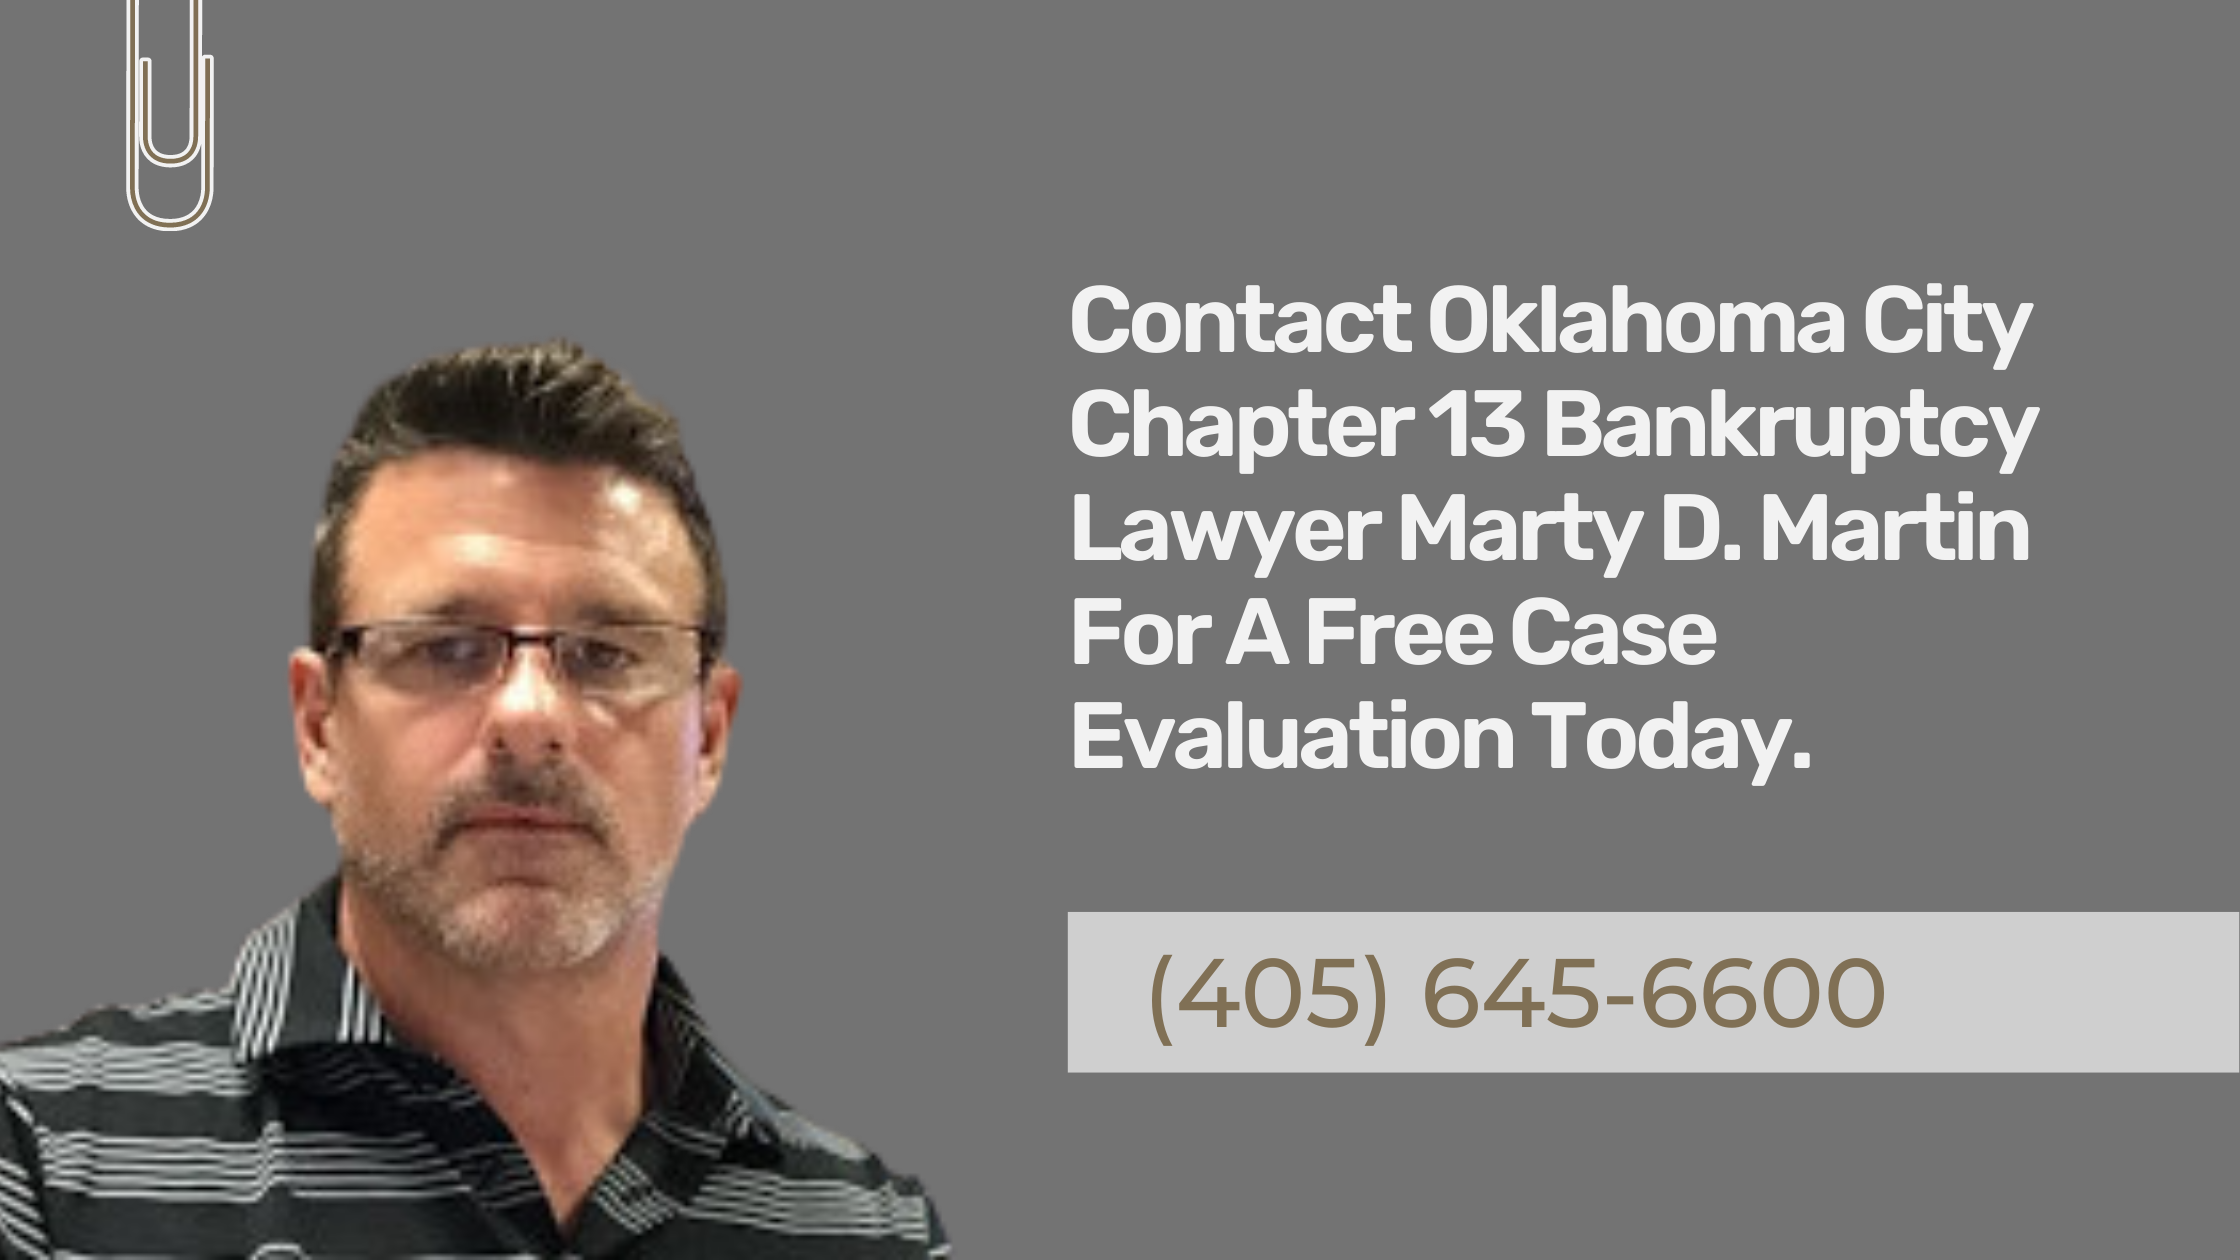 Contact Oklahoma City Chapter 13 Bankruptcy Lawyer Marty D. Martin